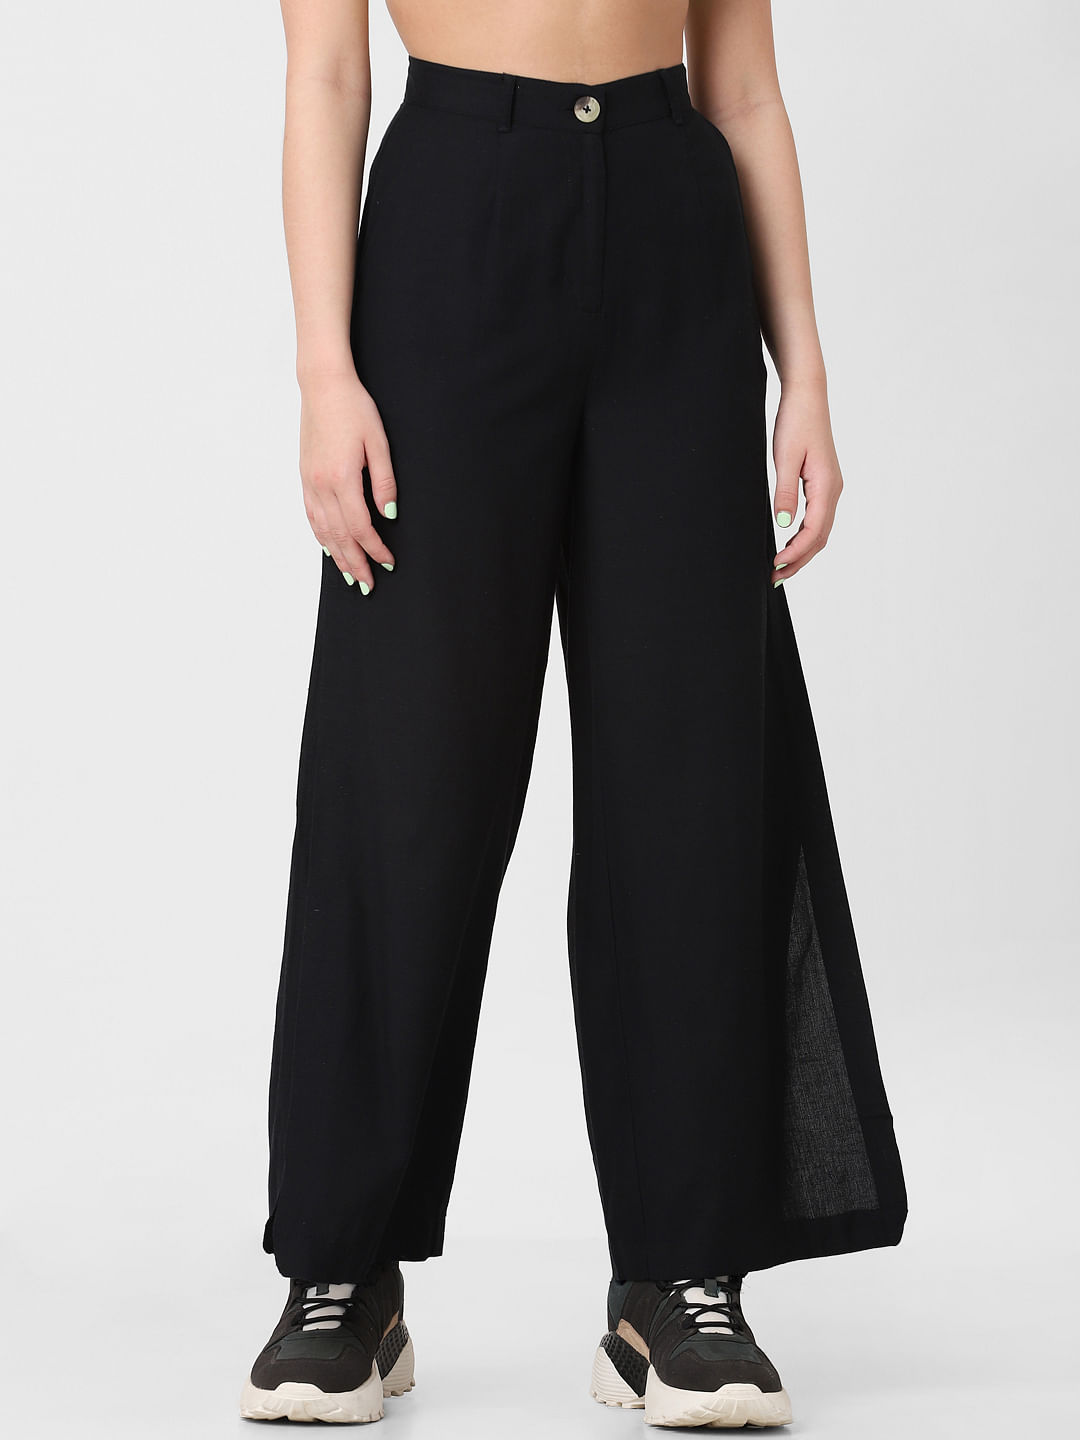 Black Trousers With An Elastic Waistband  Styched Fashion